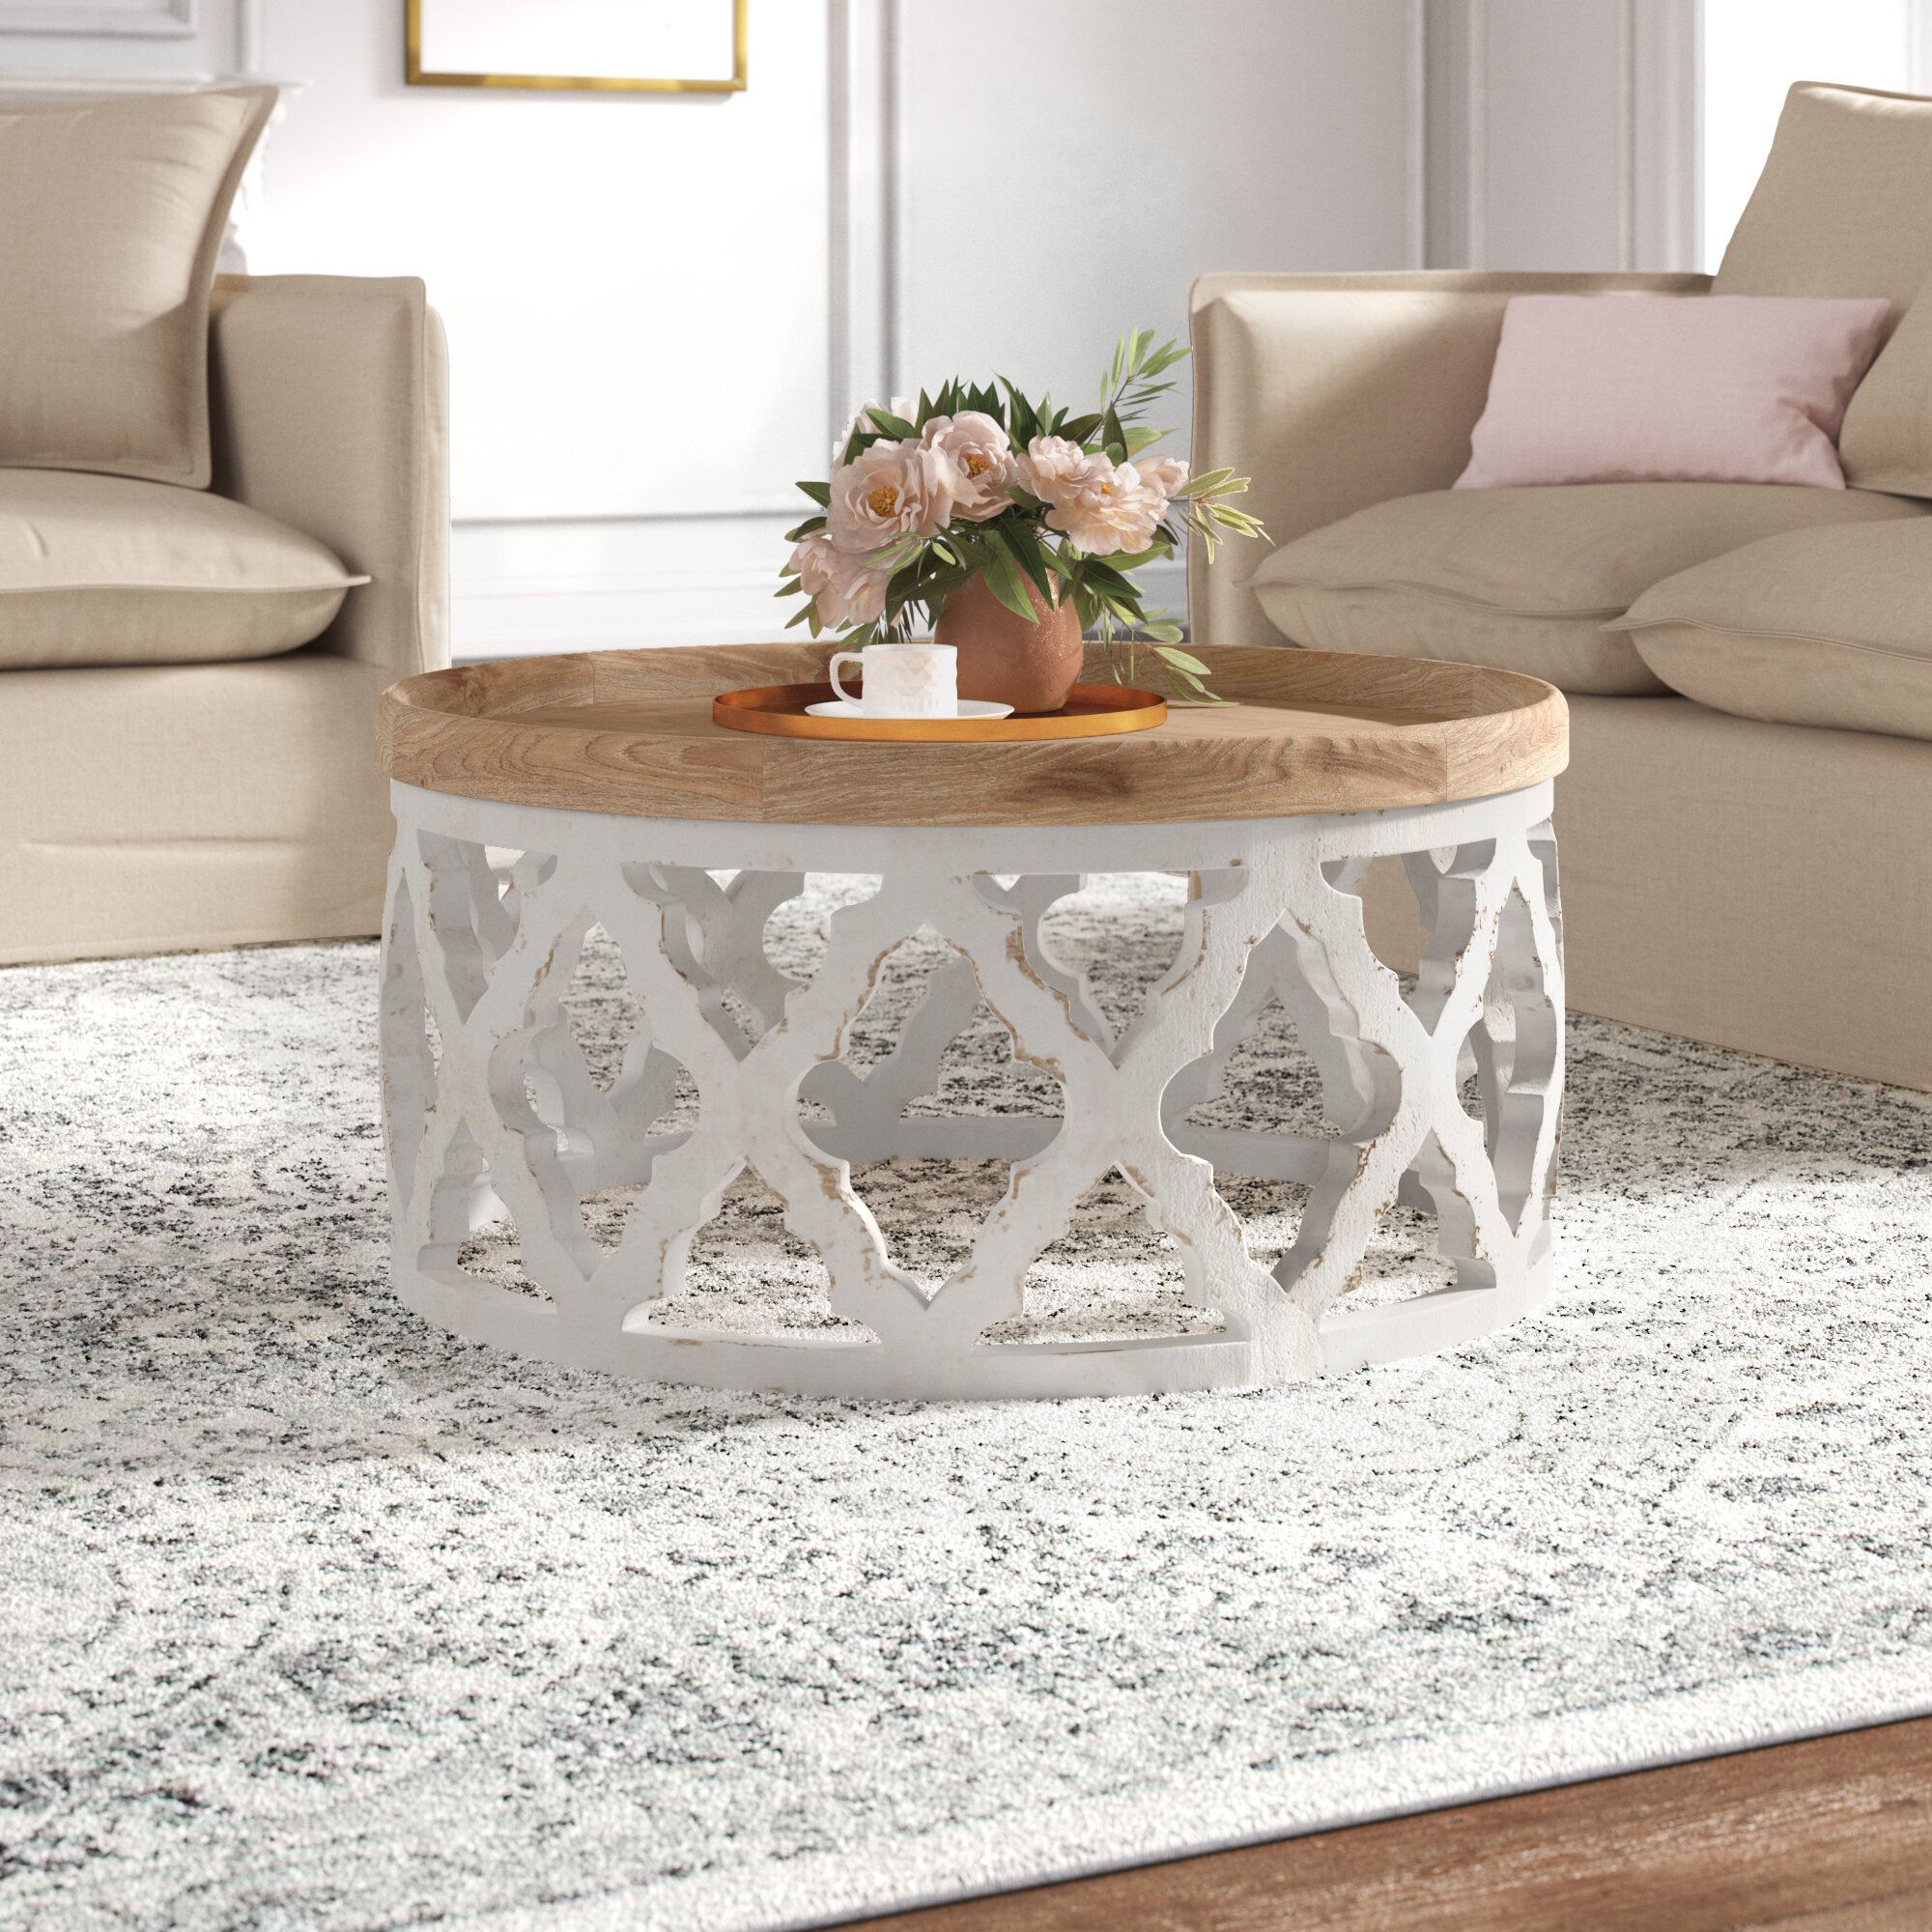 Kelly Clarkson Home Davina Drum Coffee Table & Reviews | Wayfair Throughout Drum Shaped Coffee Tables (View 15 of 20)